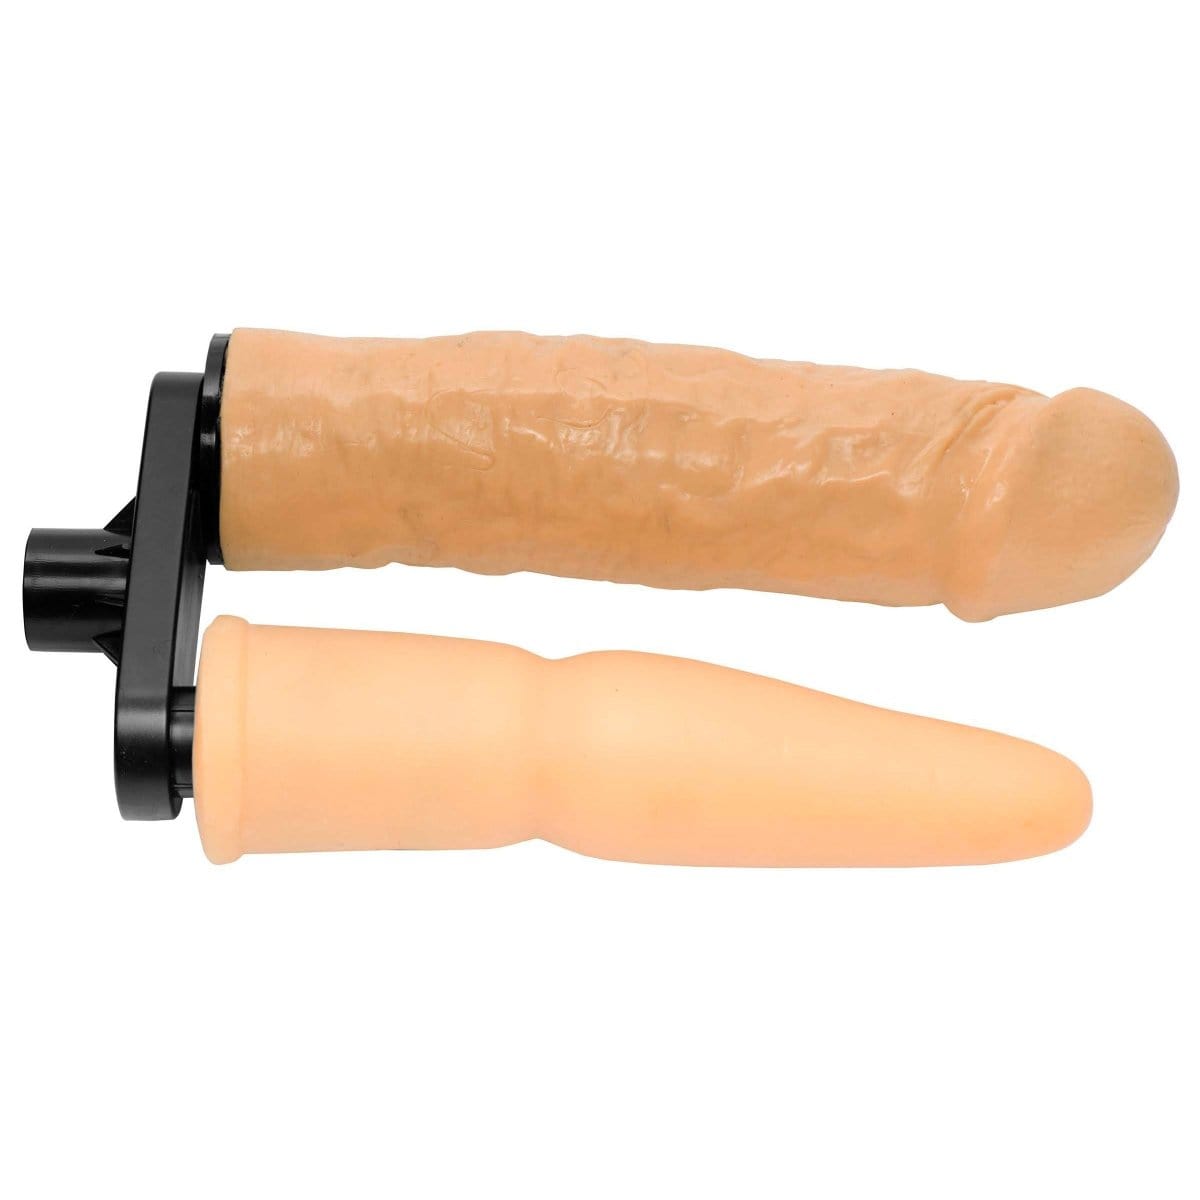 LoveBotz Sex Machine Accessories Dual Delight Double Penetration Adapter at the Haus of Shag